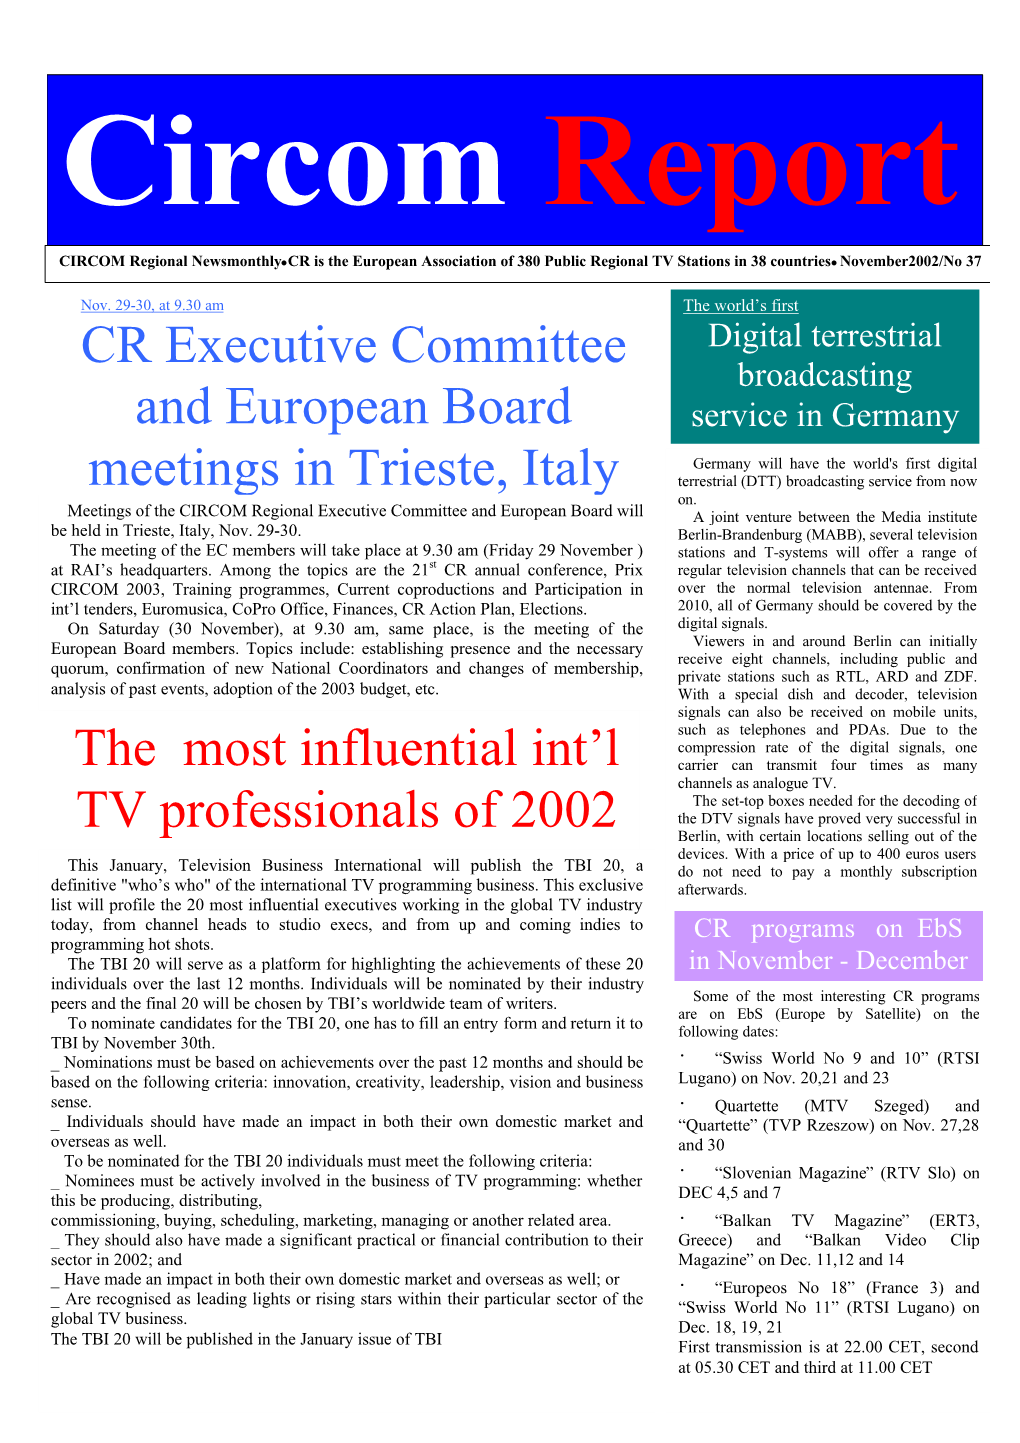 CR Executive Committee and European Board Meetings in Trieste, Italy the Most Influential Int'l TV Professionals of 2002